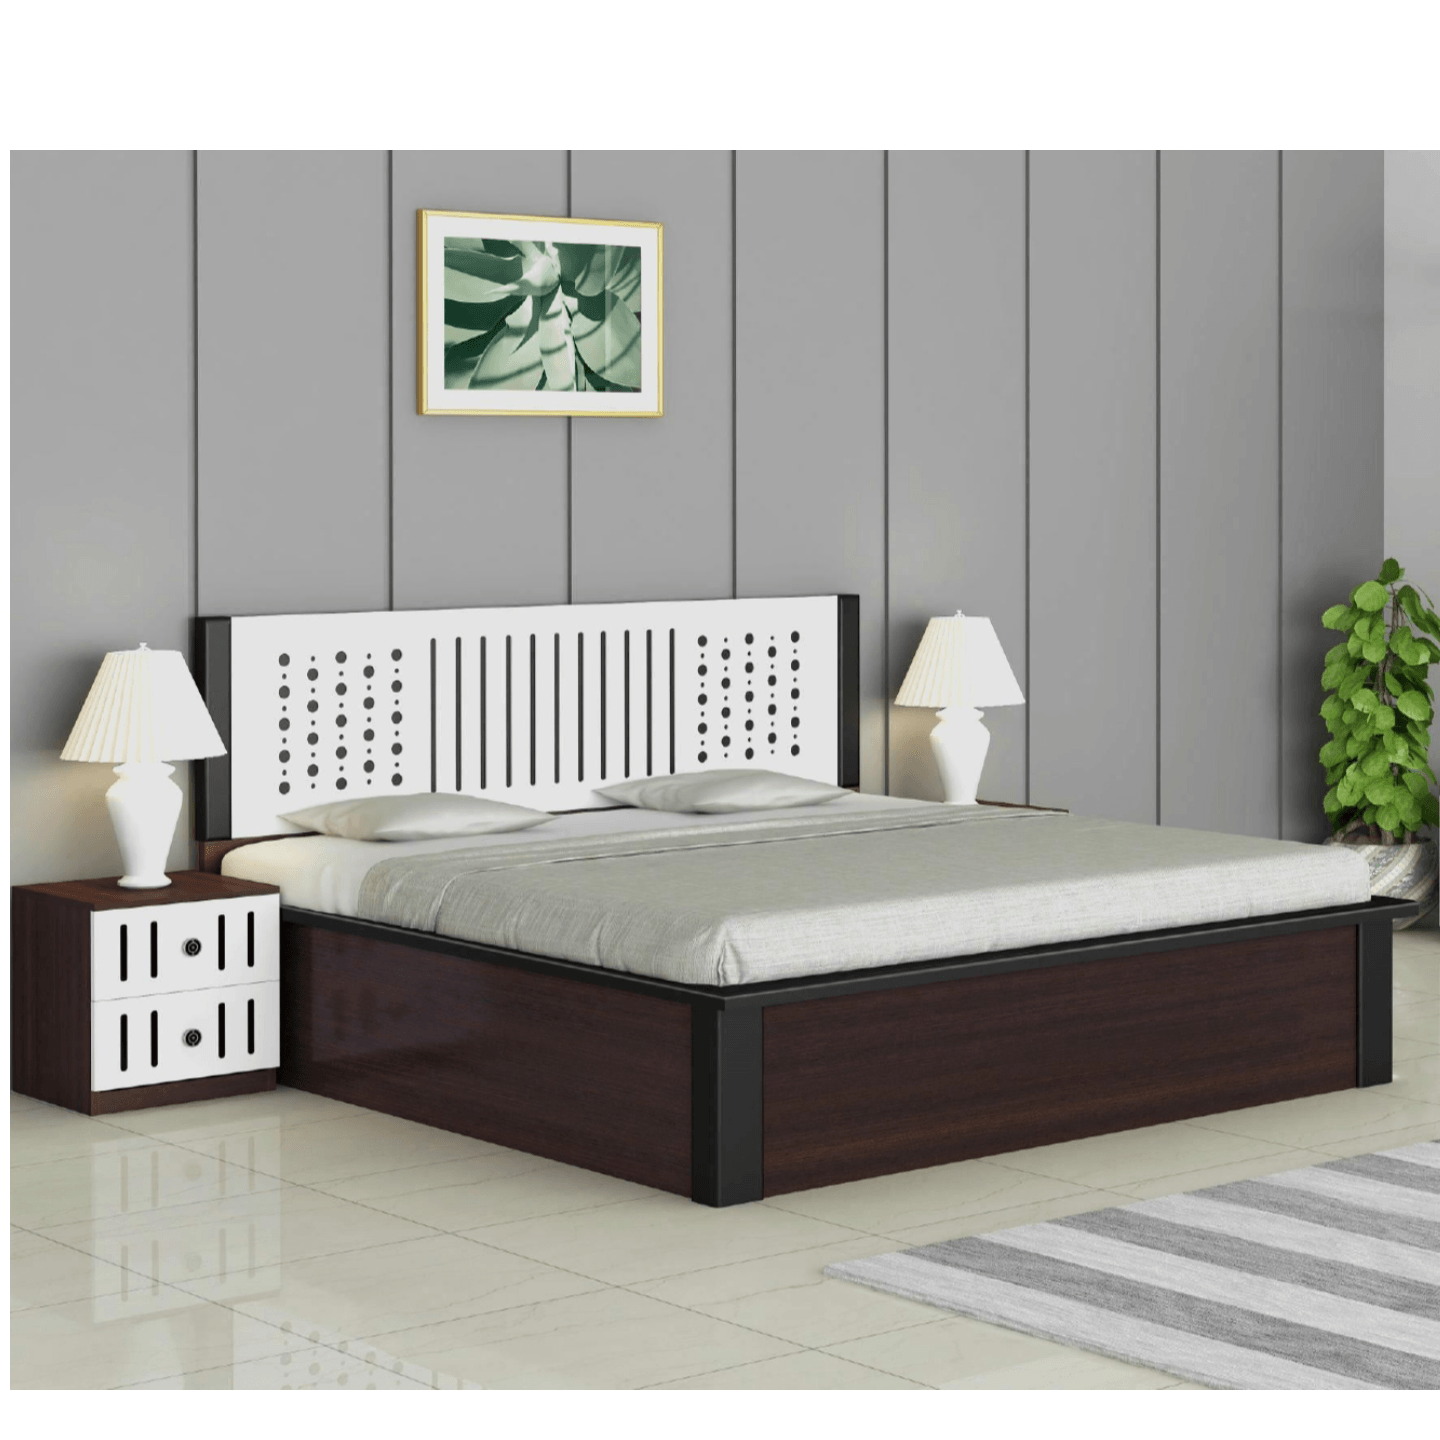 HS Queen Size Bed With Box Eritge In Dark Brown Colour